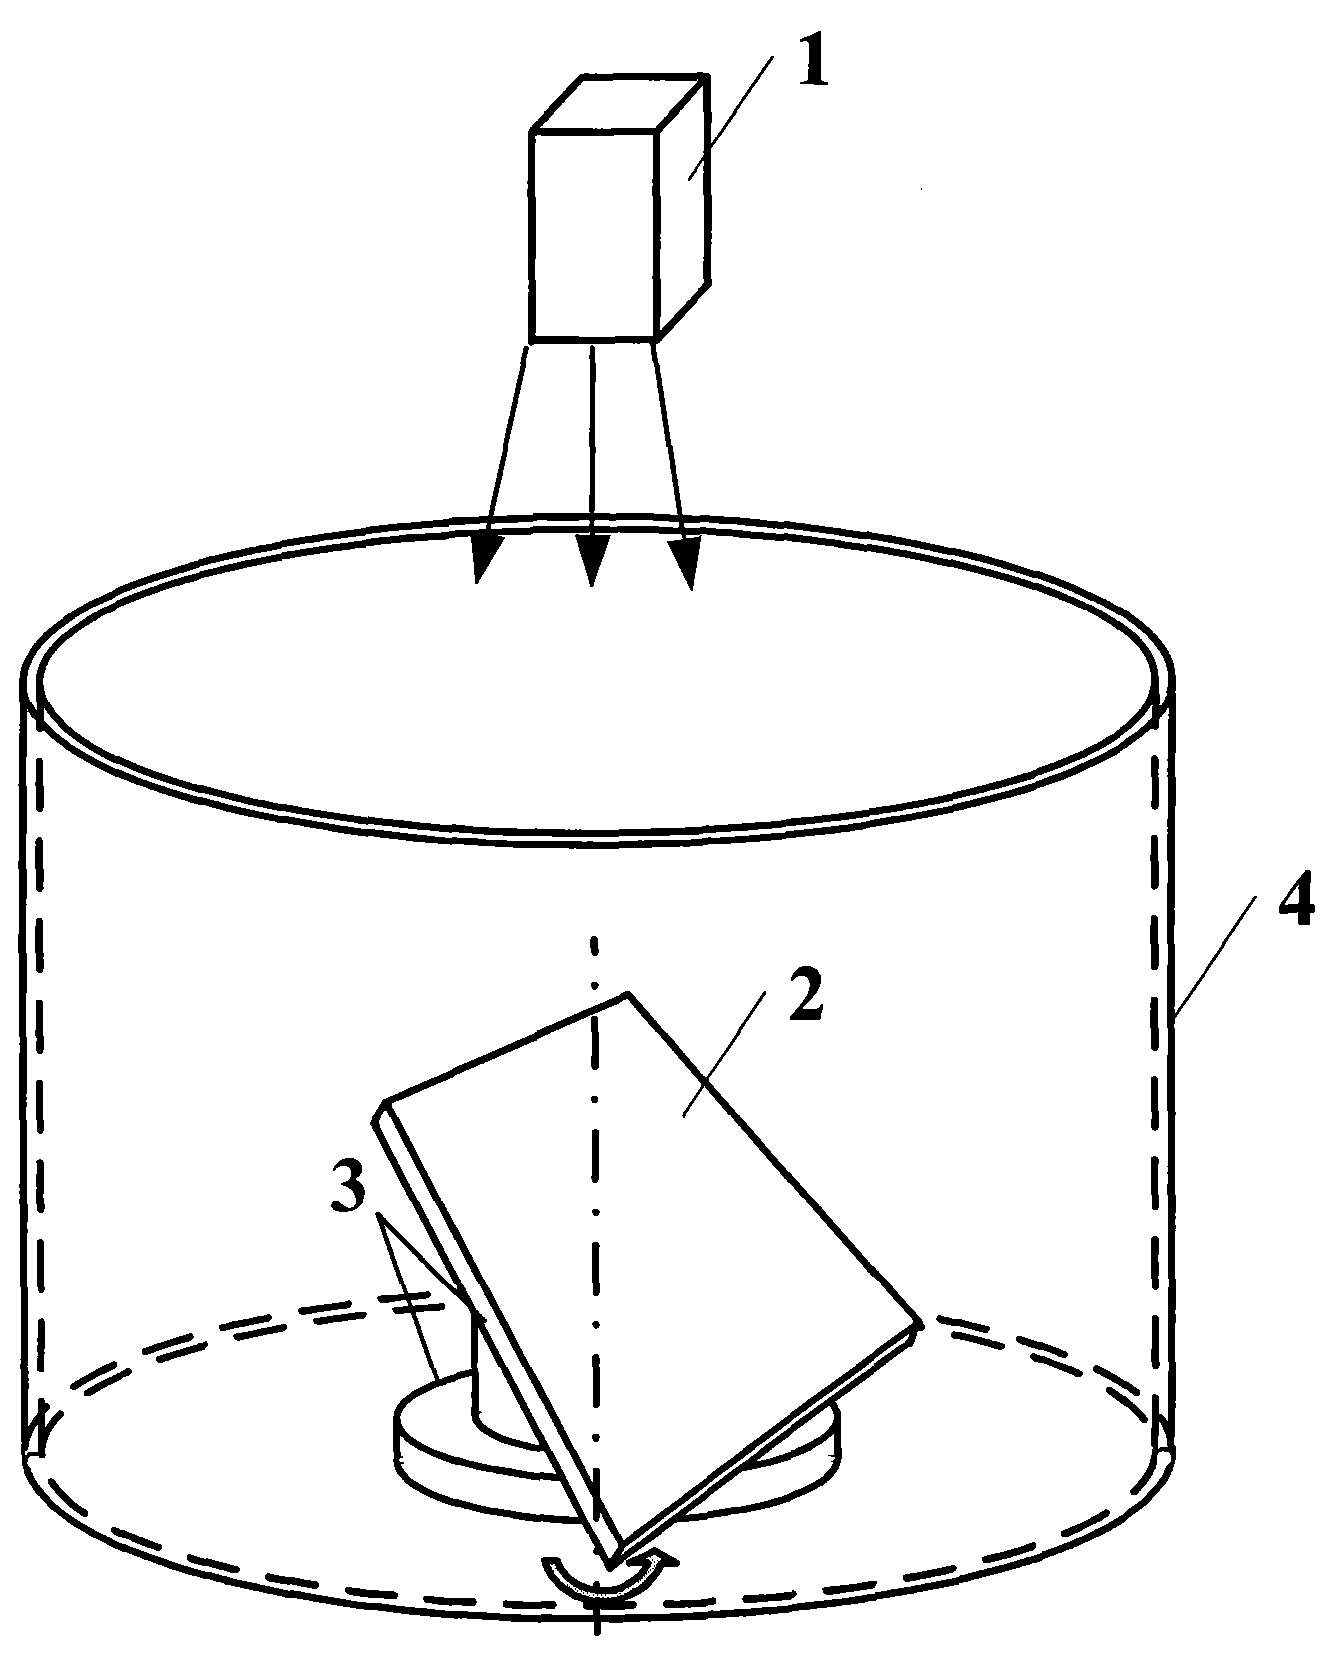 Three-dimensional display device of full-view visual field based on high-speed projector